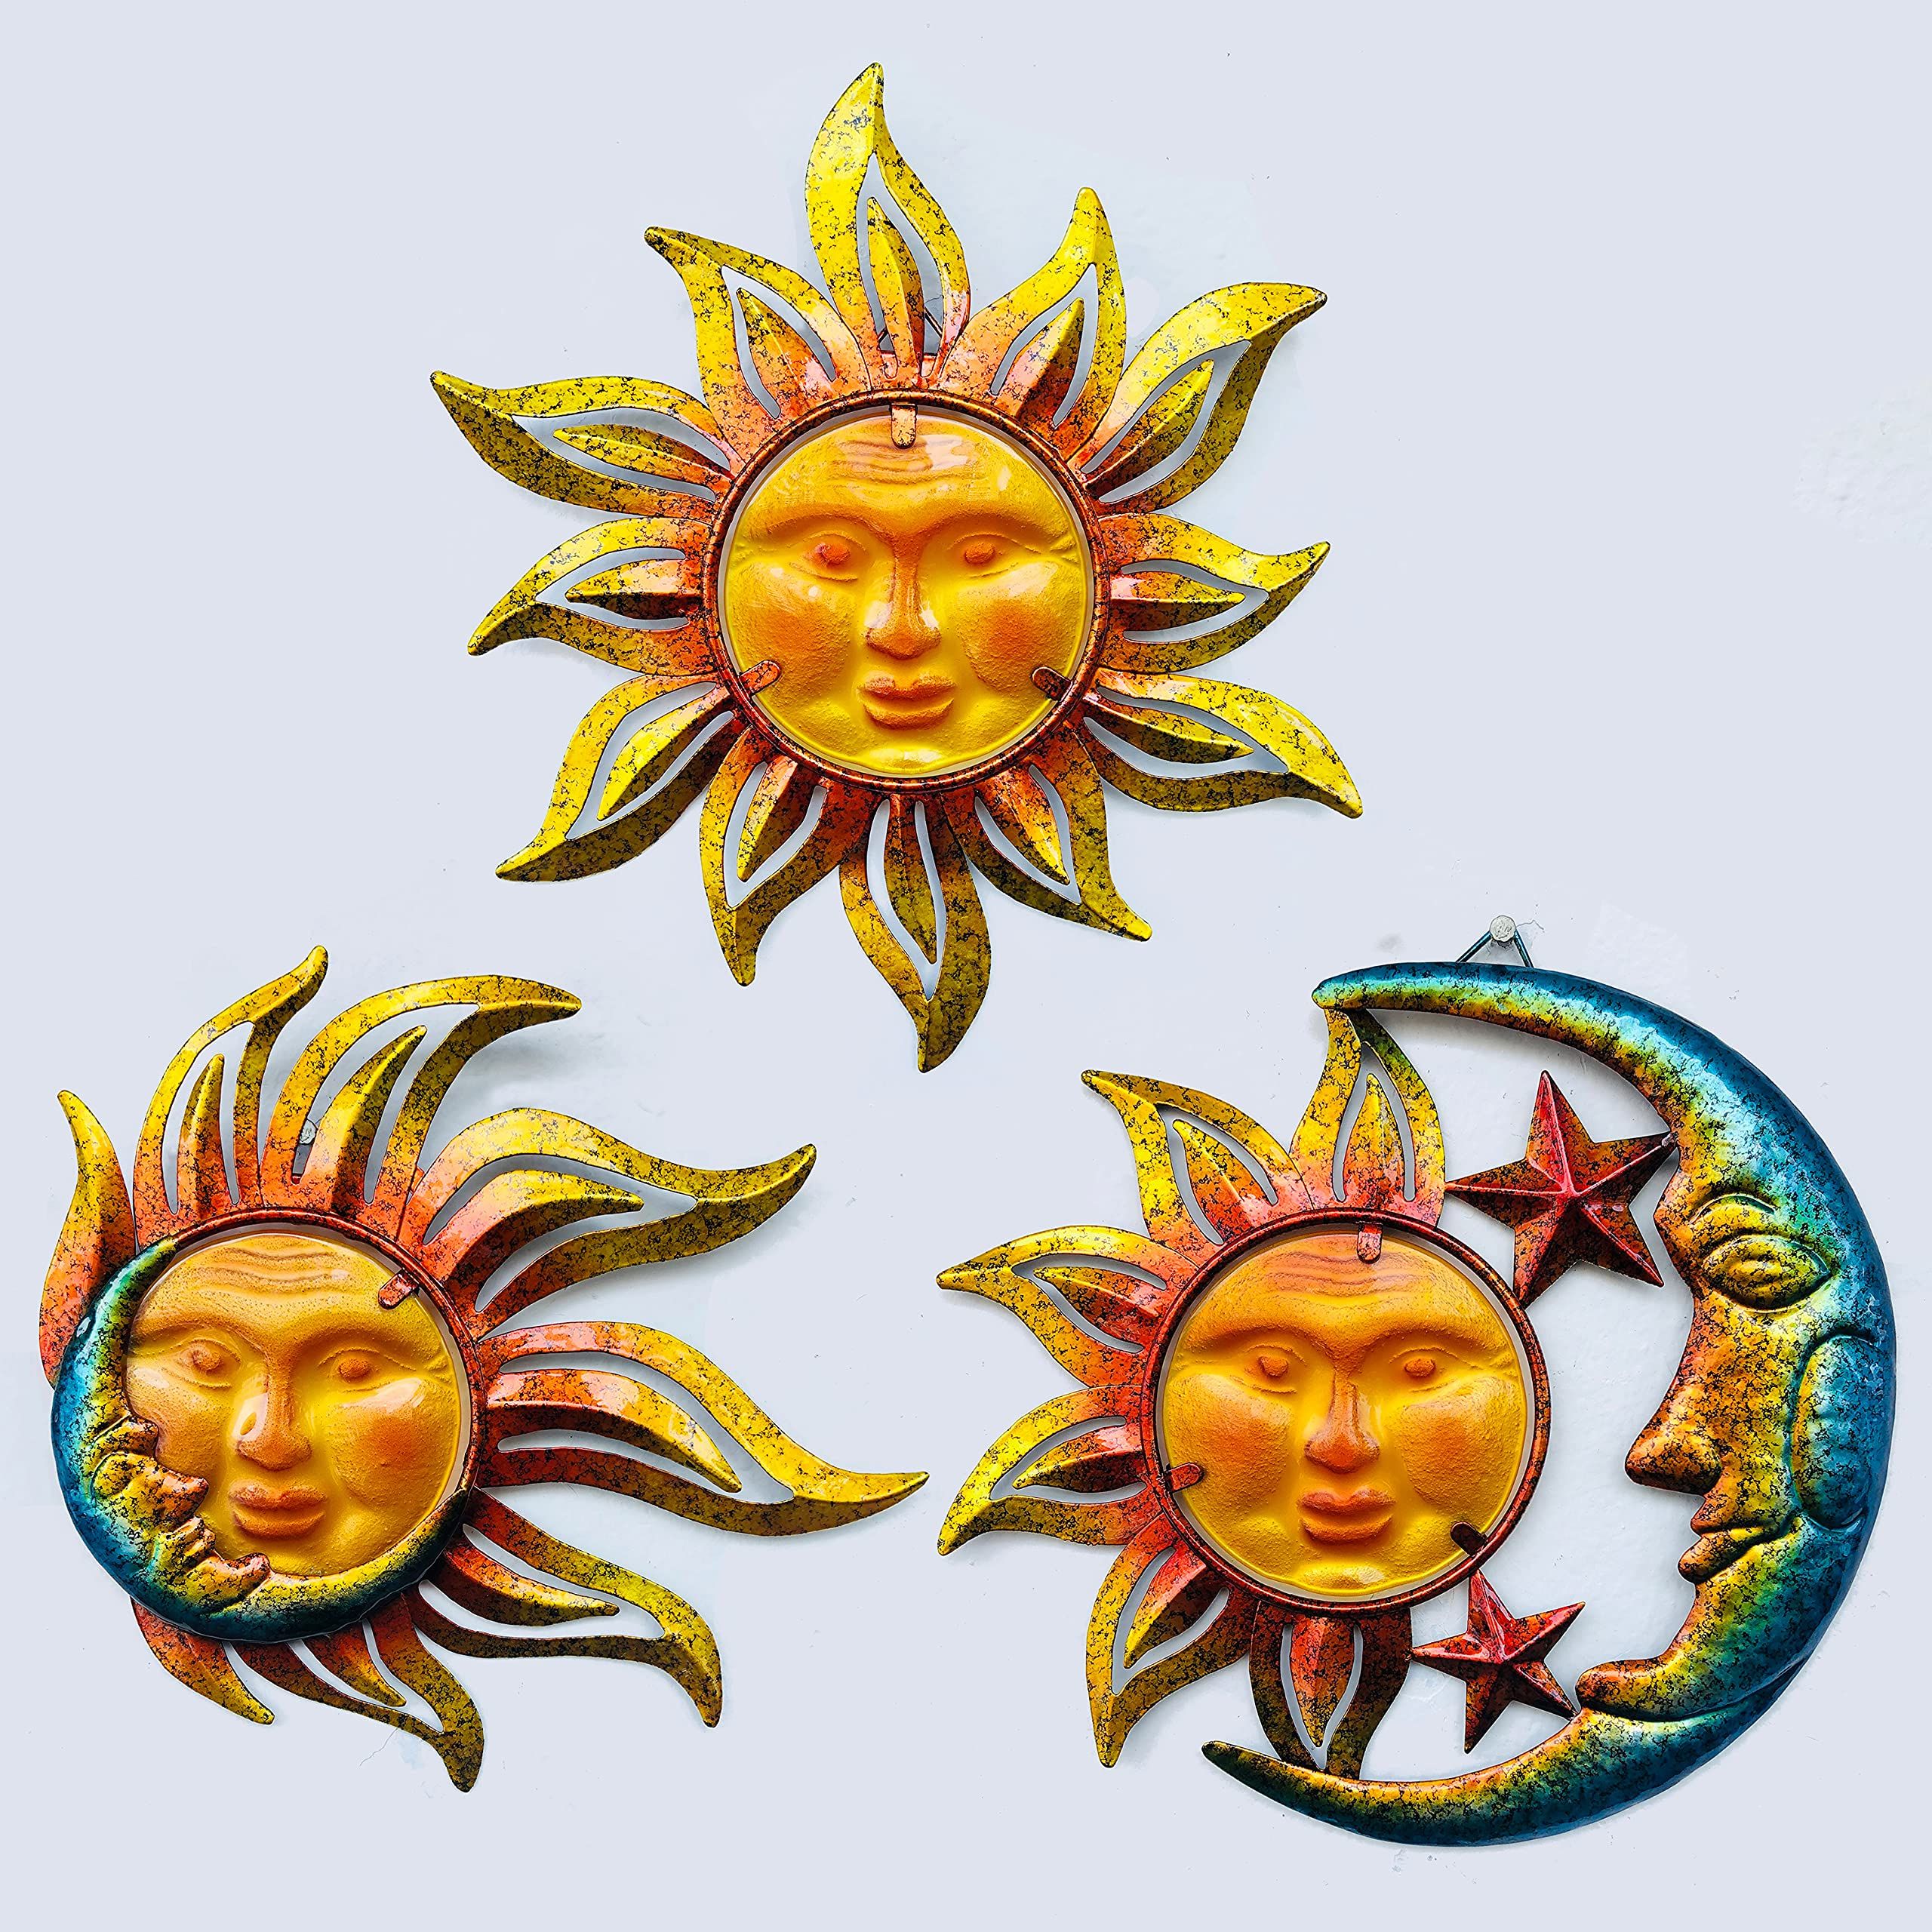 Metal & Glass Hanging Wall Art Within Most Popular Amazon: Bvlfook Sun Face Metal Wall Art Decor Outdoor Indoor, Sun Moon  Star, Metal & Glass Hanging Wall Patio Decorations For Outdoor Living Room  Bedroom Garden Porch Fence Balcony, Set Of 3, (View 2 of 15)